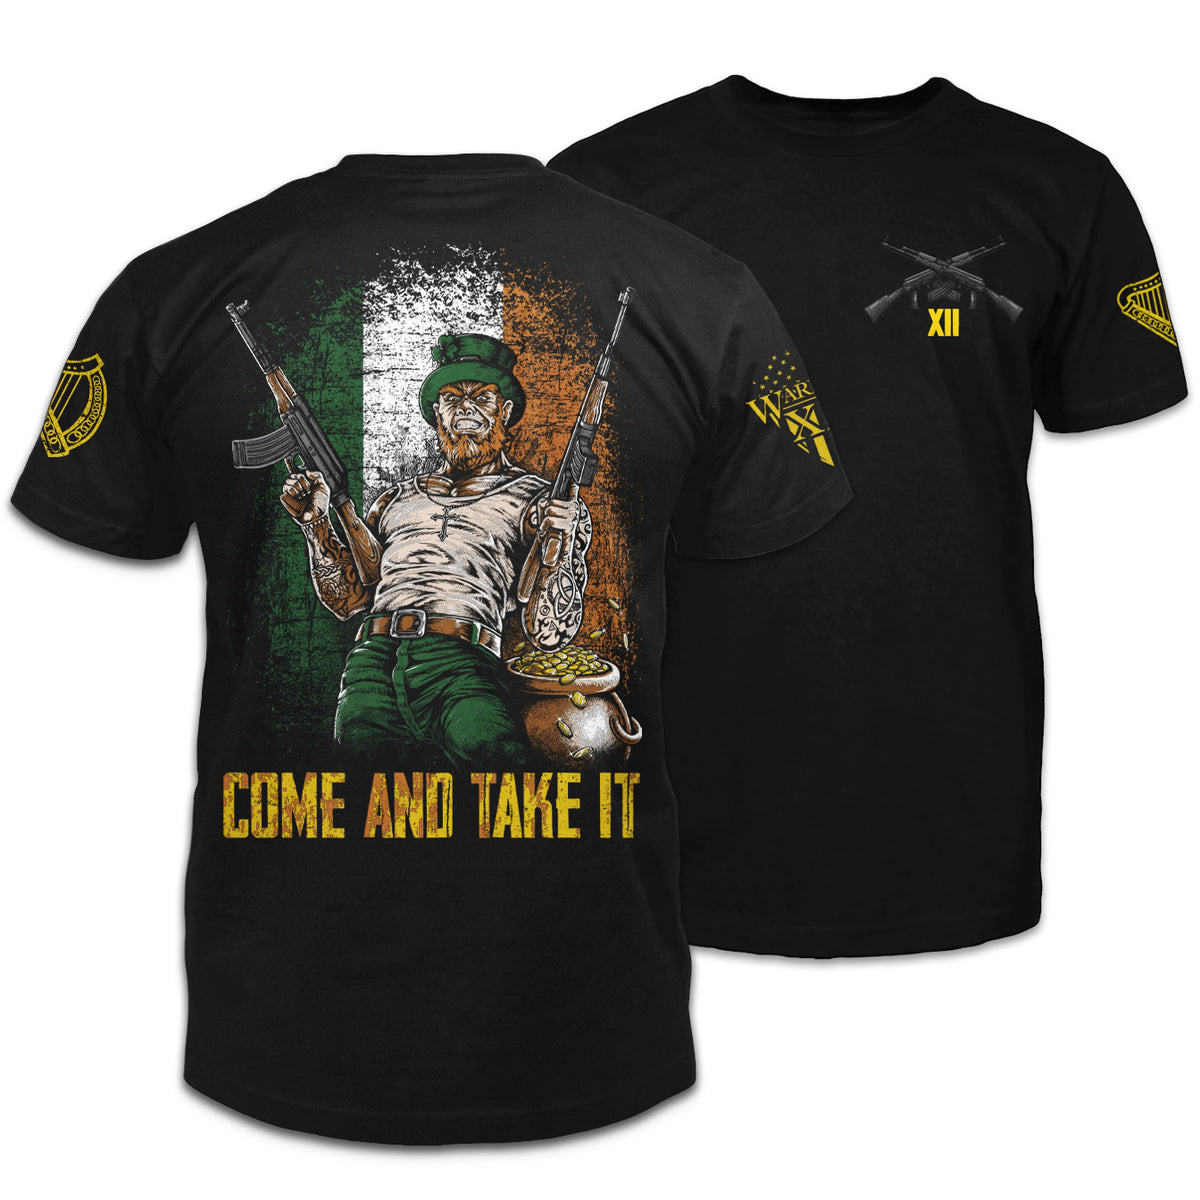 Front & back black t-shirt with the words "Come and take it" with an Irish man holding two guns in front of an Irish flag printed on the shirt.